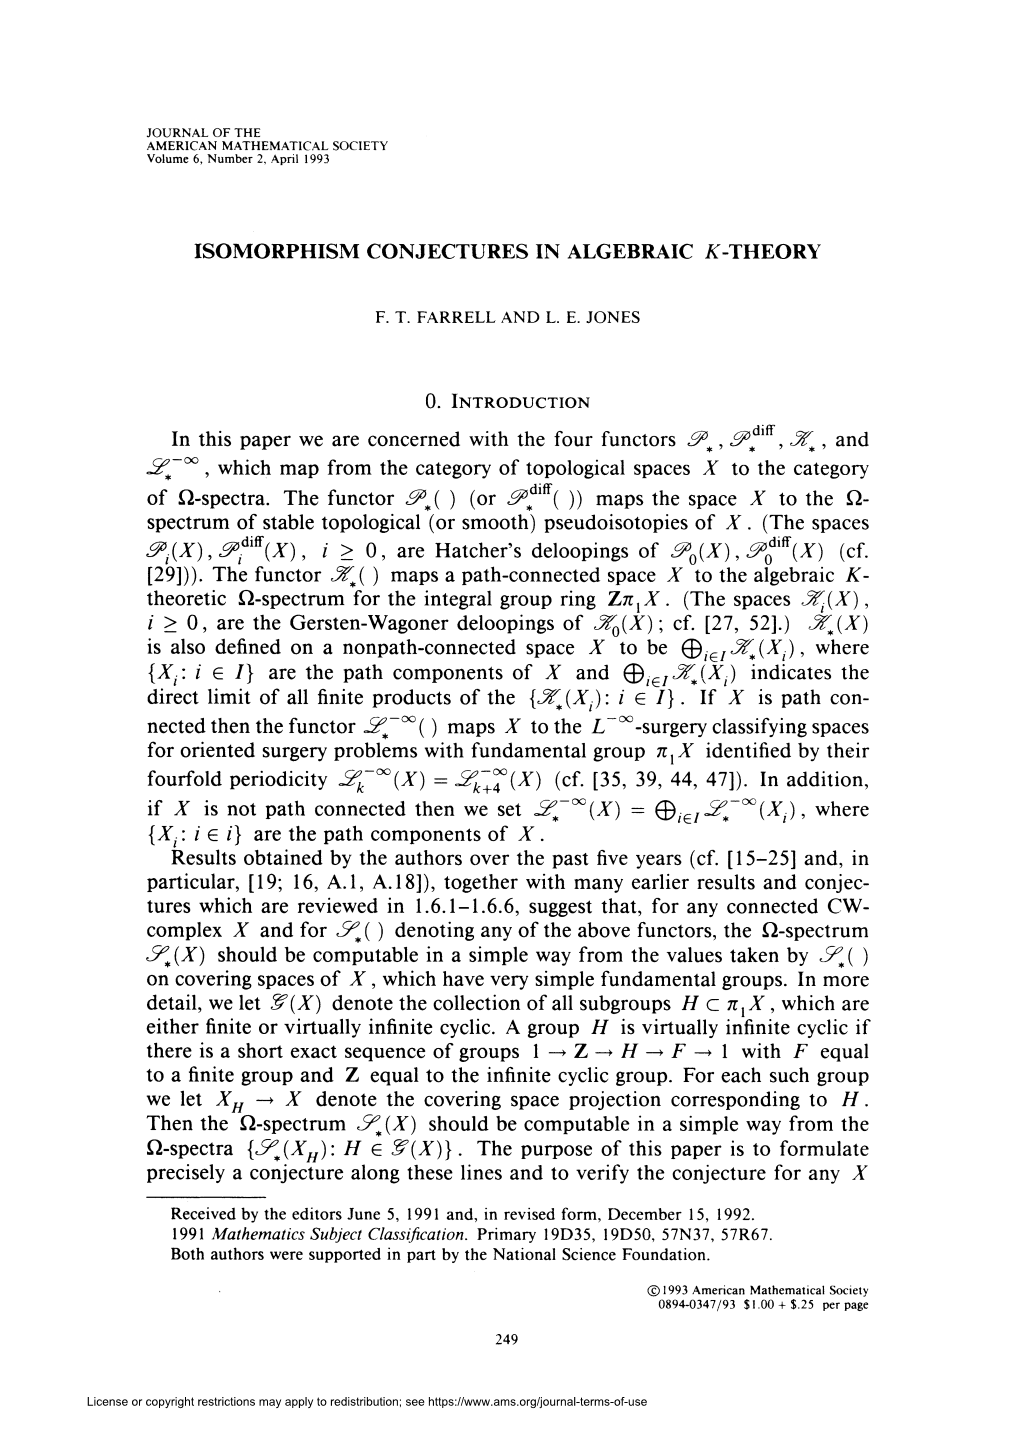 Isomorphism Conjectures in Algebraic K -Theory